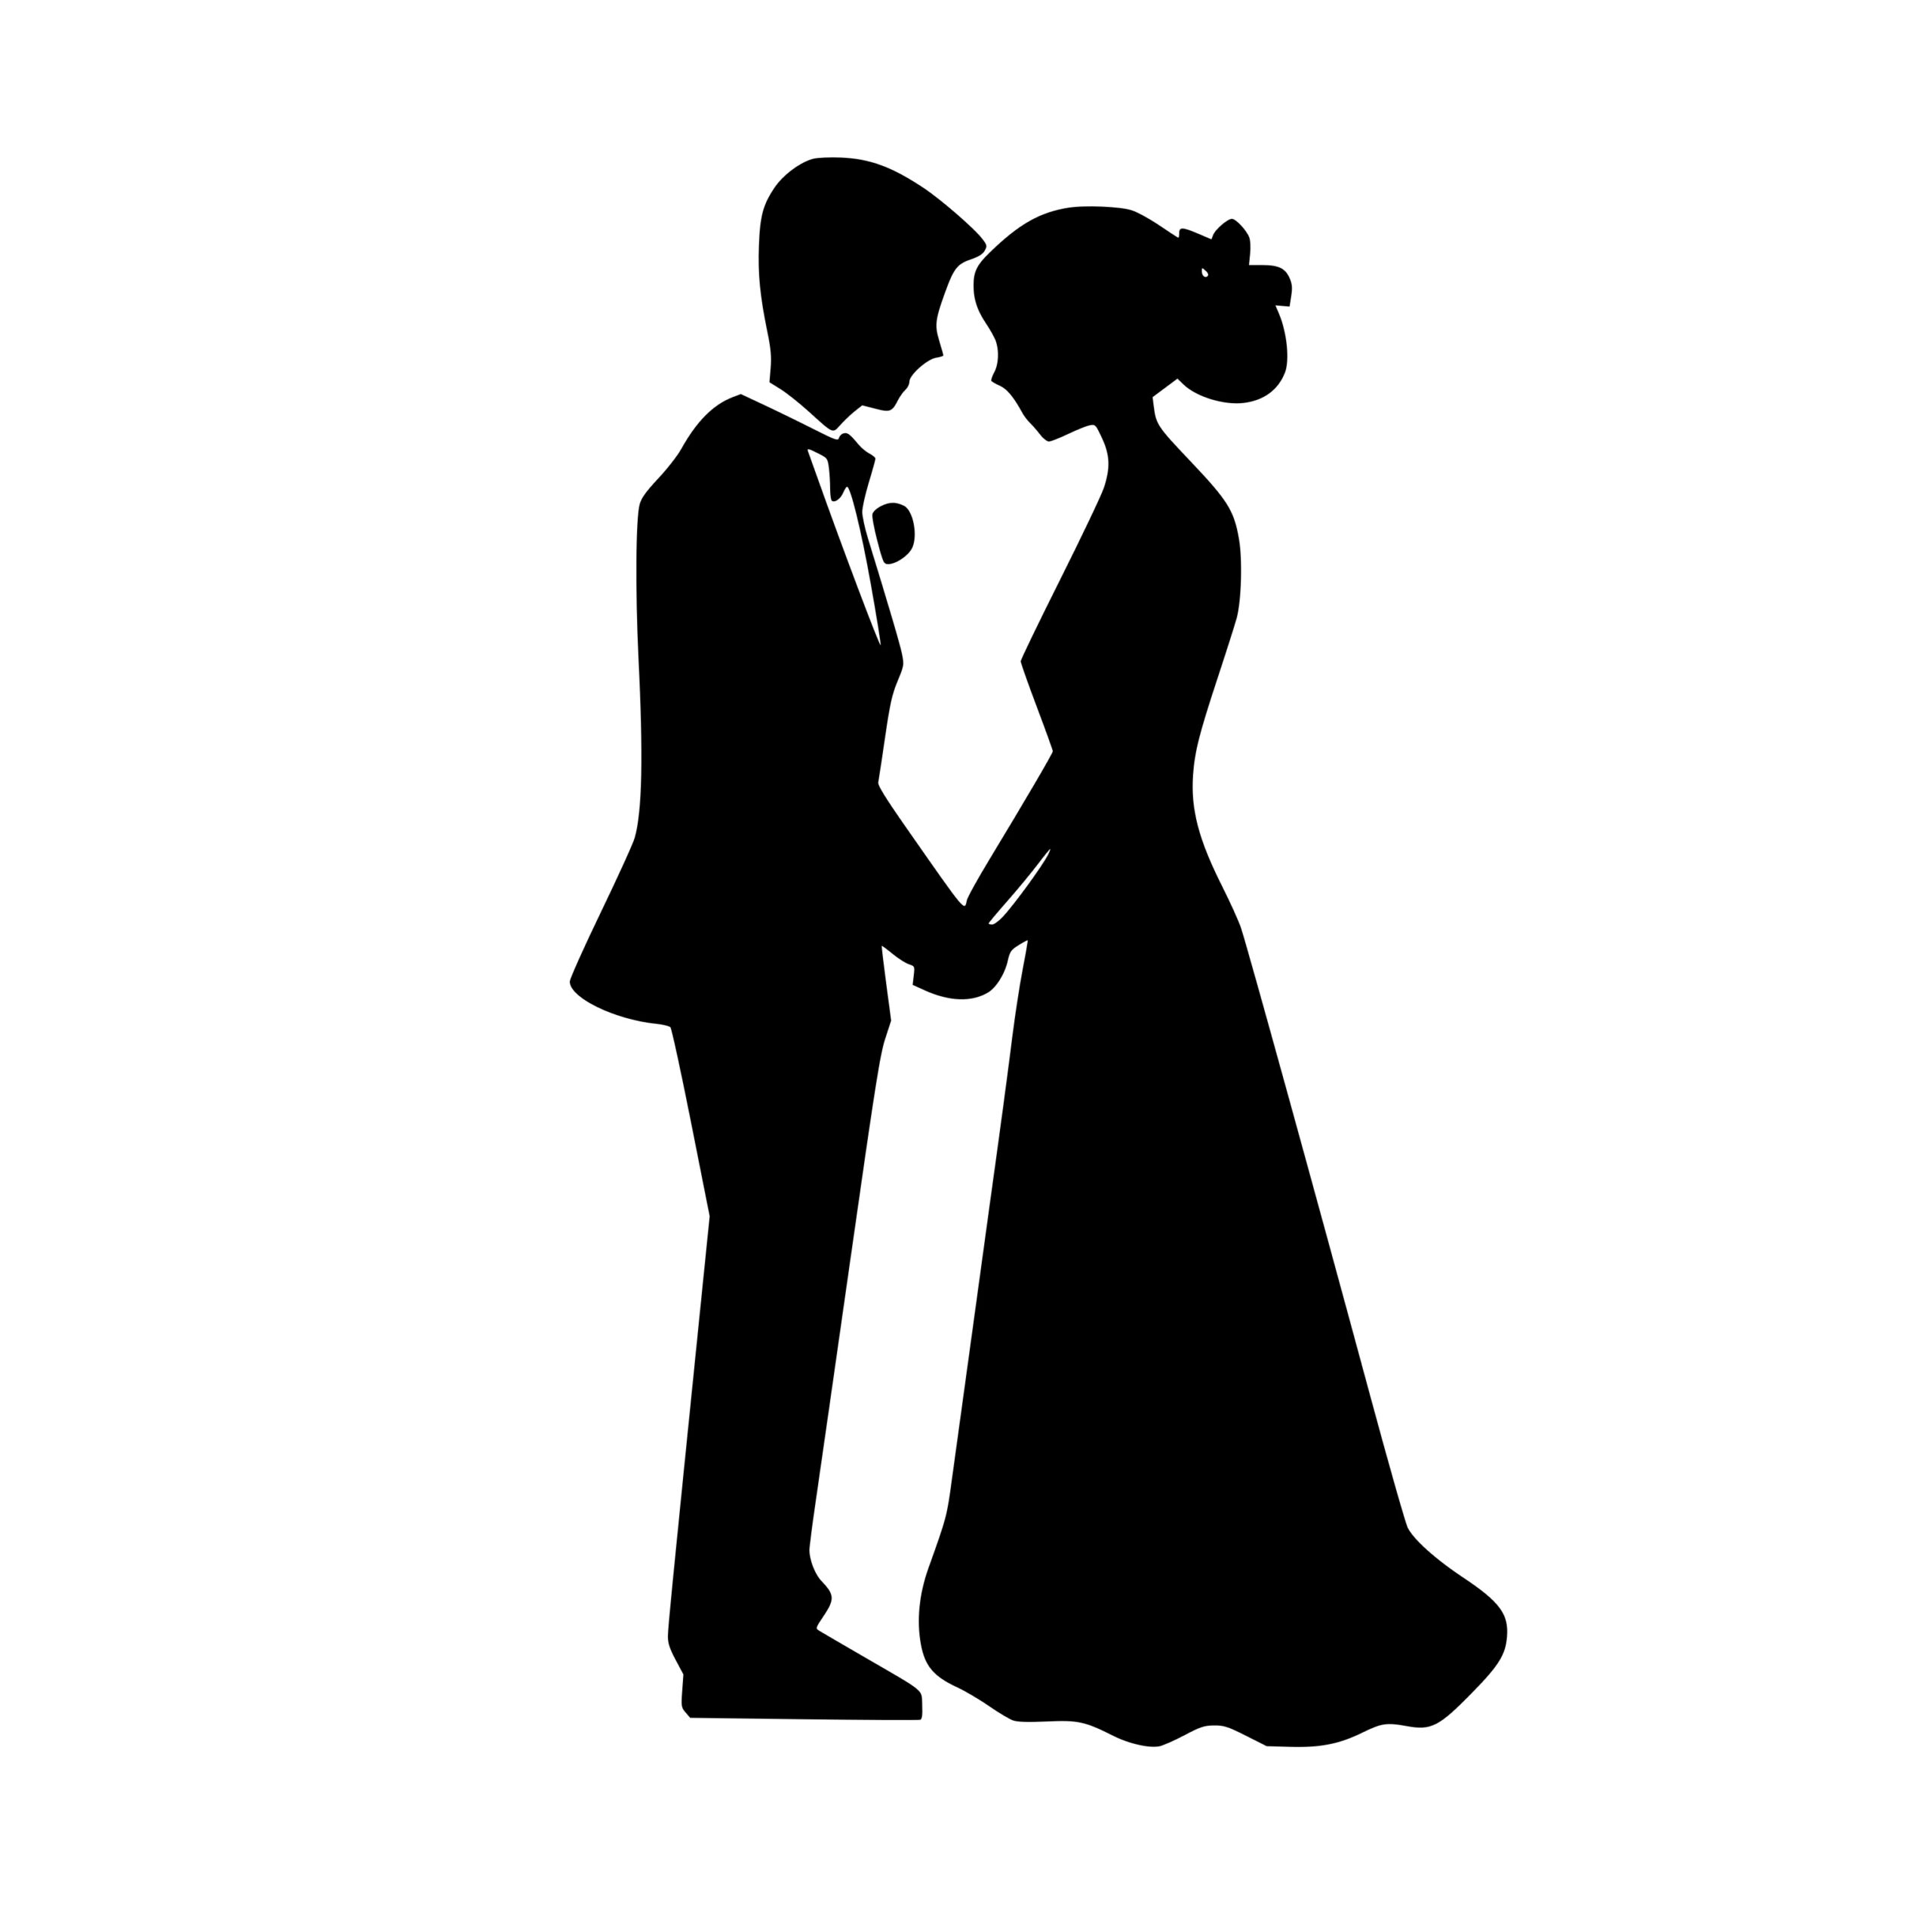 Couple Holding Hands SVG File for Cricut, Silhouette, Laser